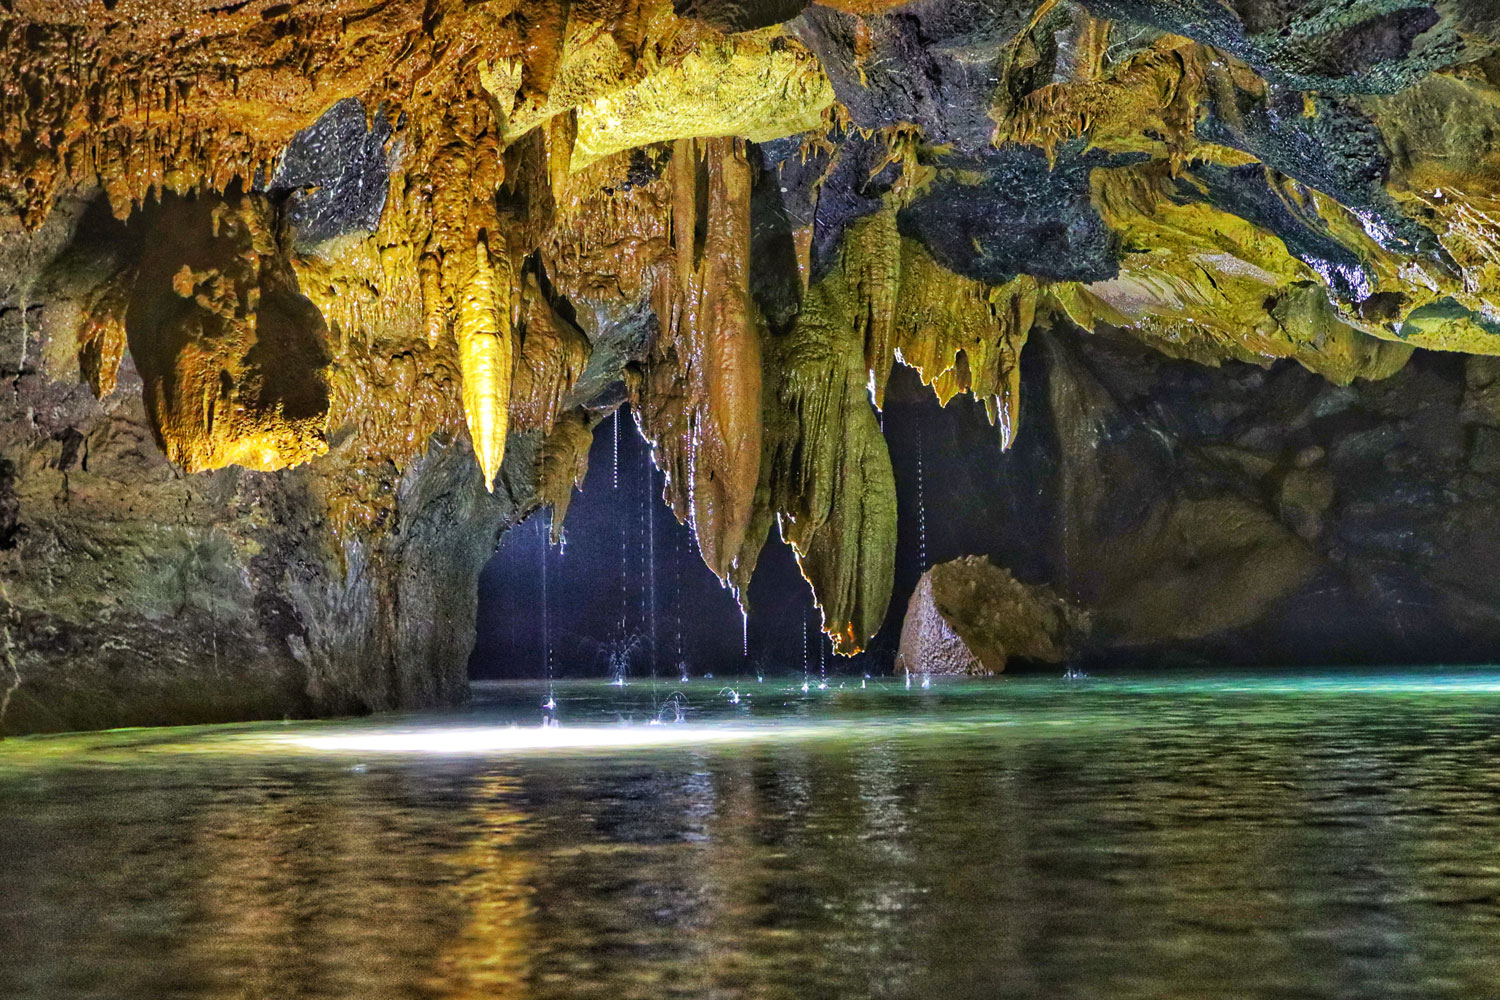 The underground river in Hang Va Cave.